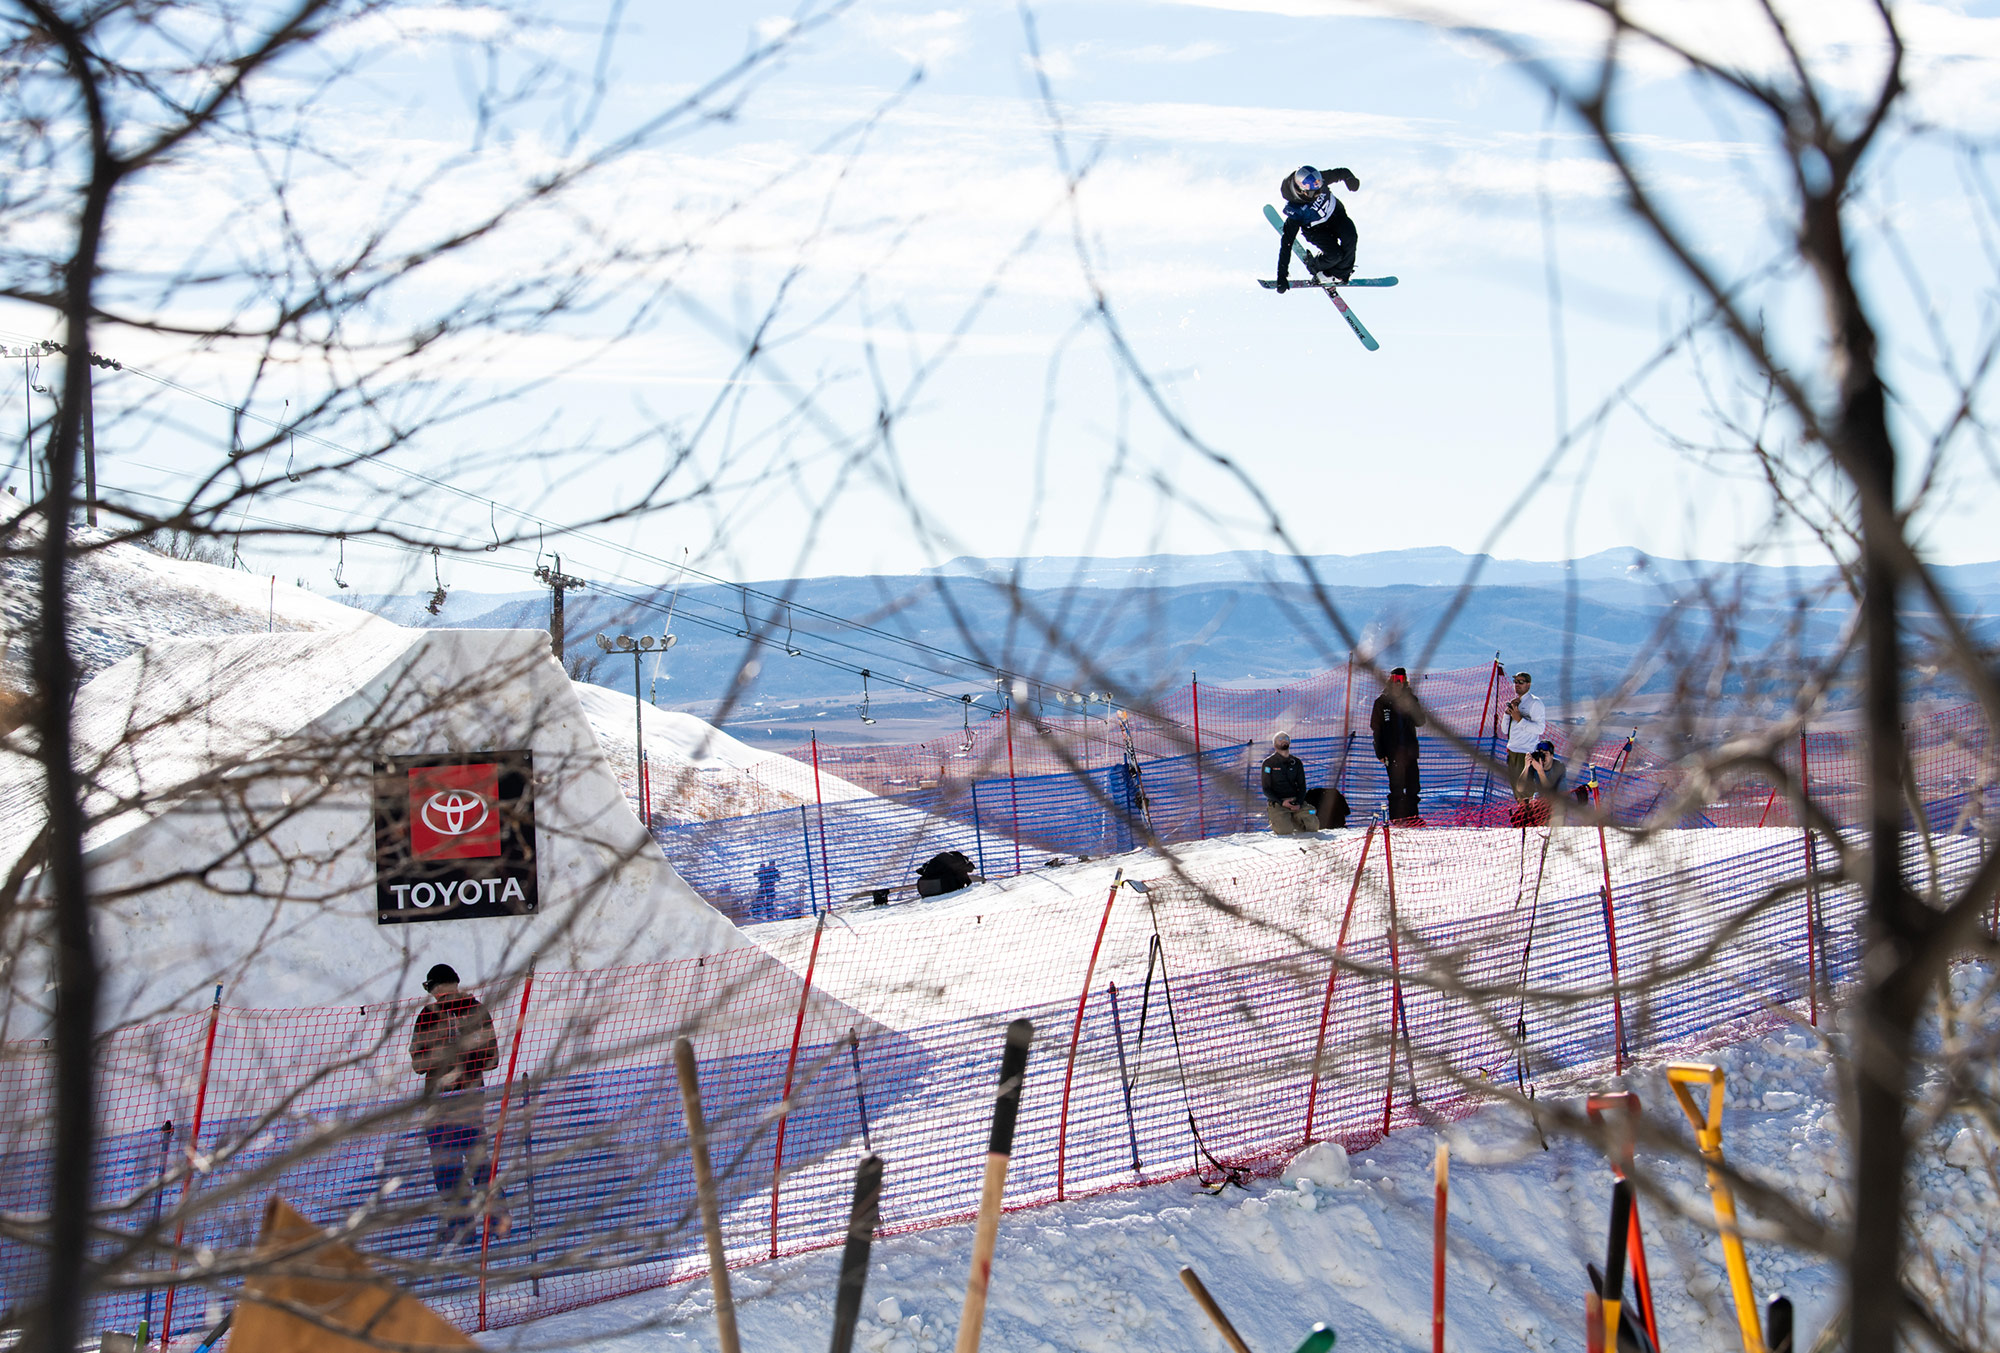 Kelly Sildaru competes at the Big Air World Cup in Steamboat, Colorado.